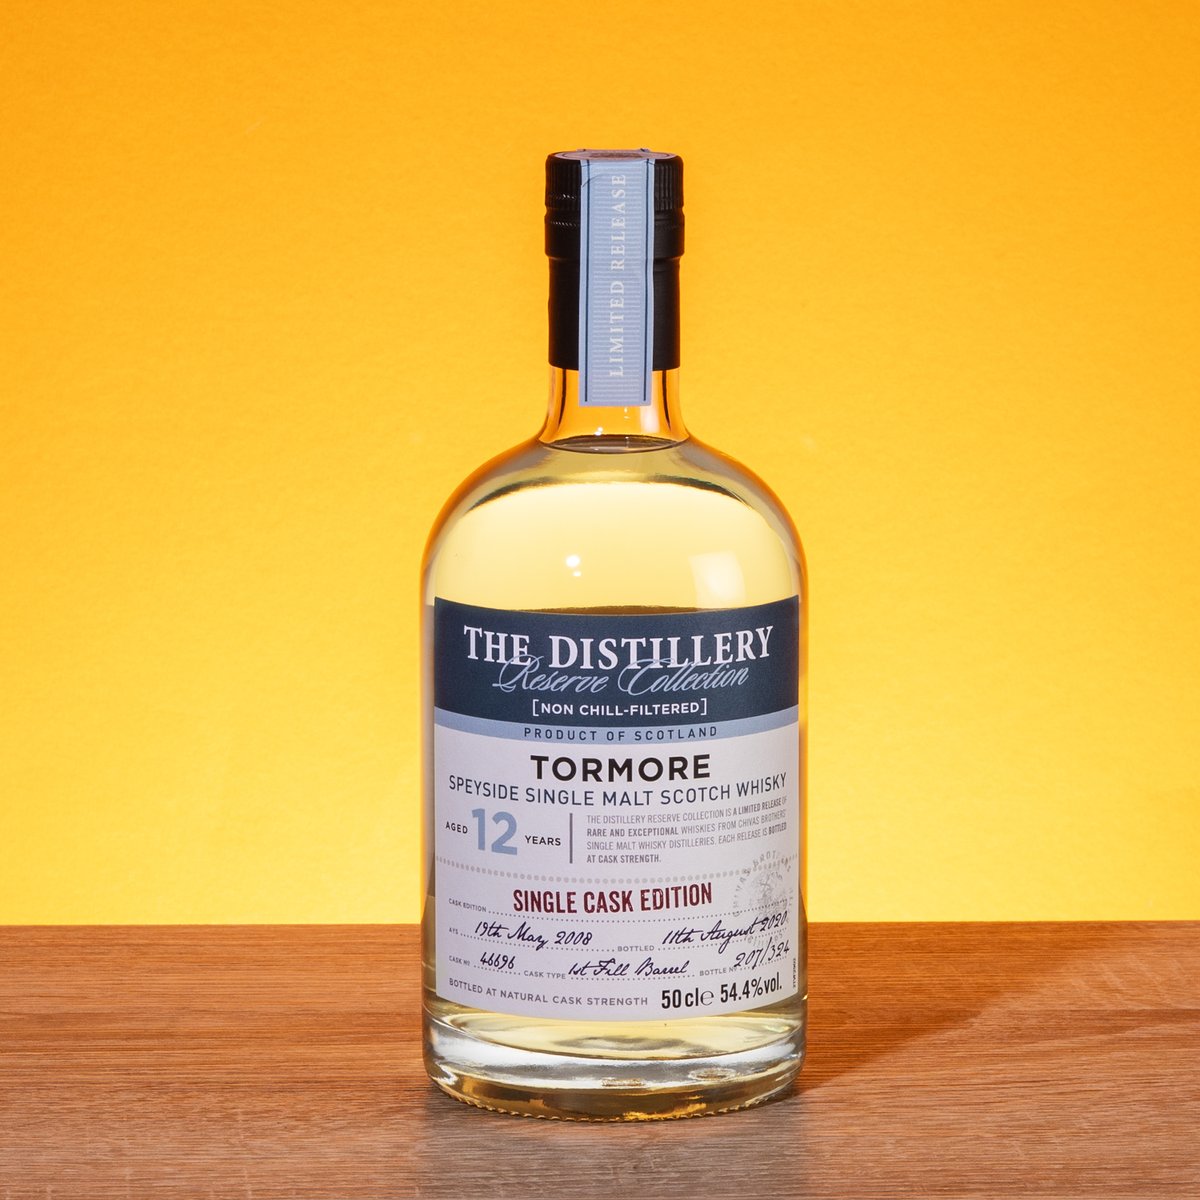 Tormore 2008 | bit.ly/3J4bO06 On the line-up for our virtual Whisky 24 Hours tasting; a 2008 single malt Tormore from Chivas Brothers. Matured in a first-fill barrel for 12 years, before being bottled in August 2020 as part of its Distillery Reserve Collection.